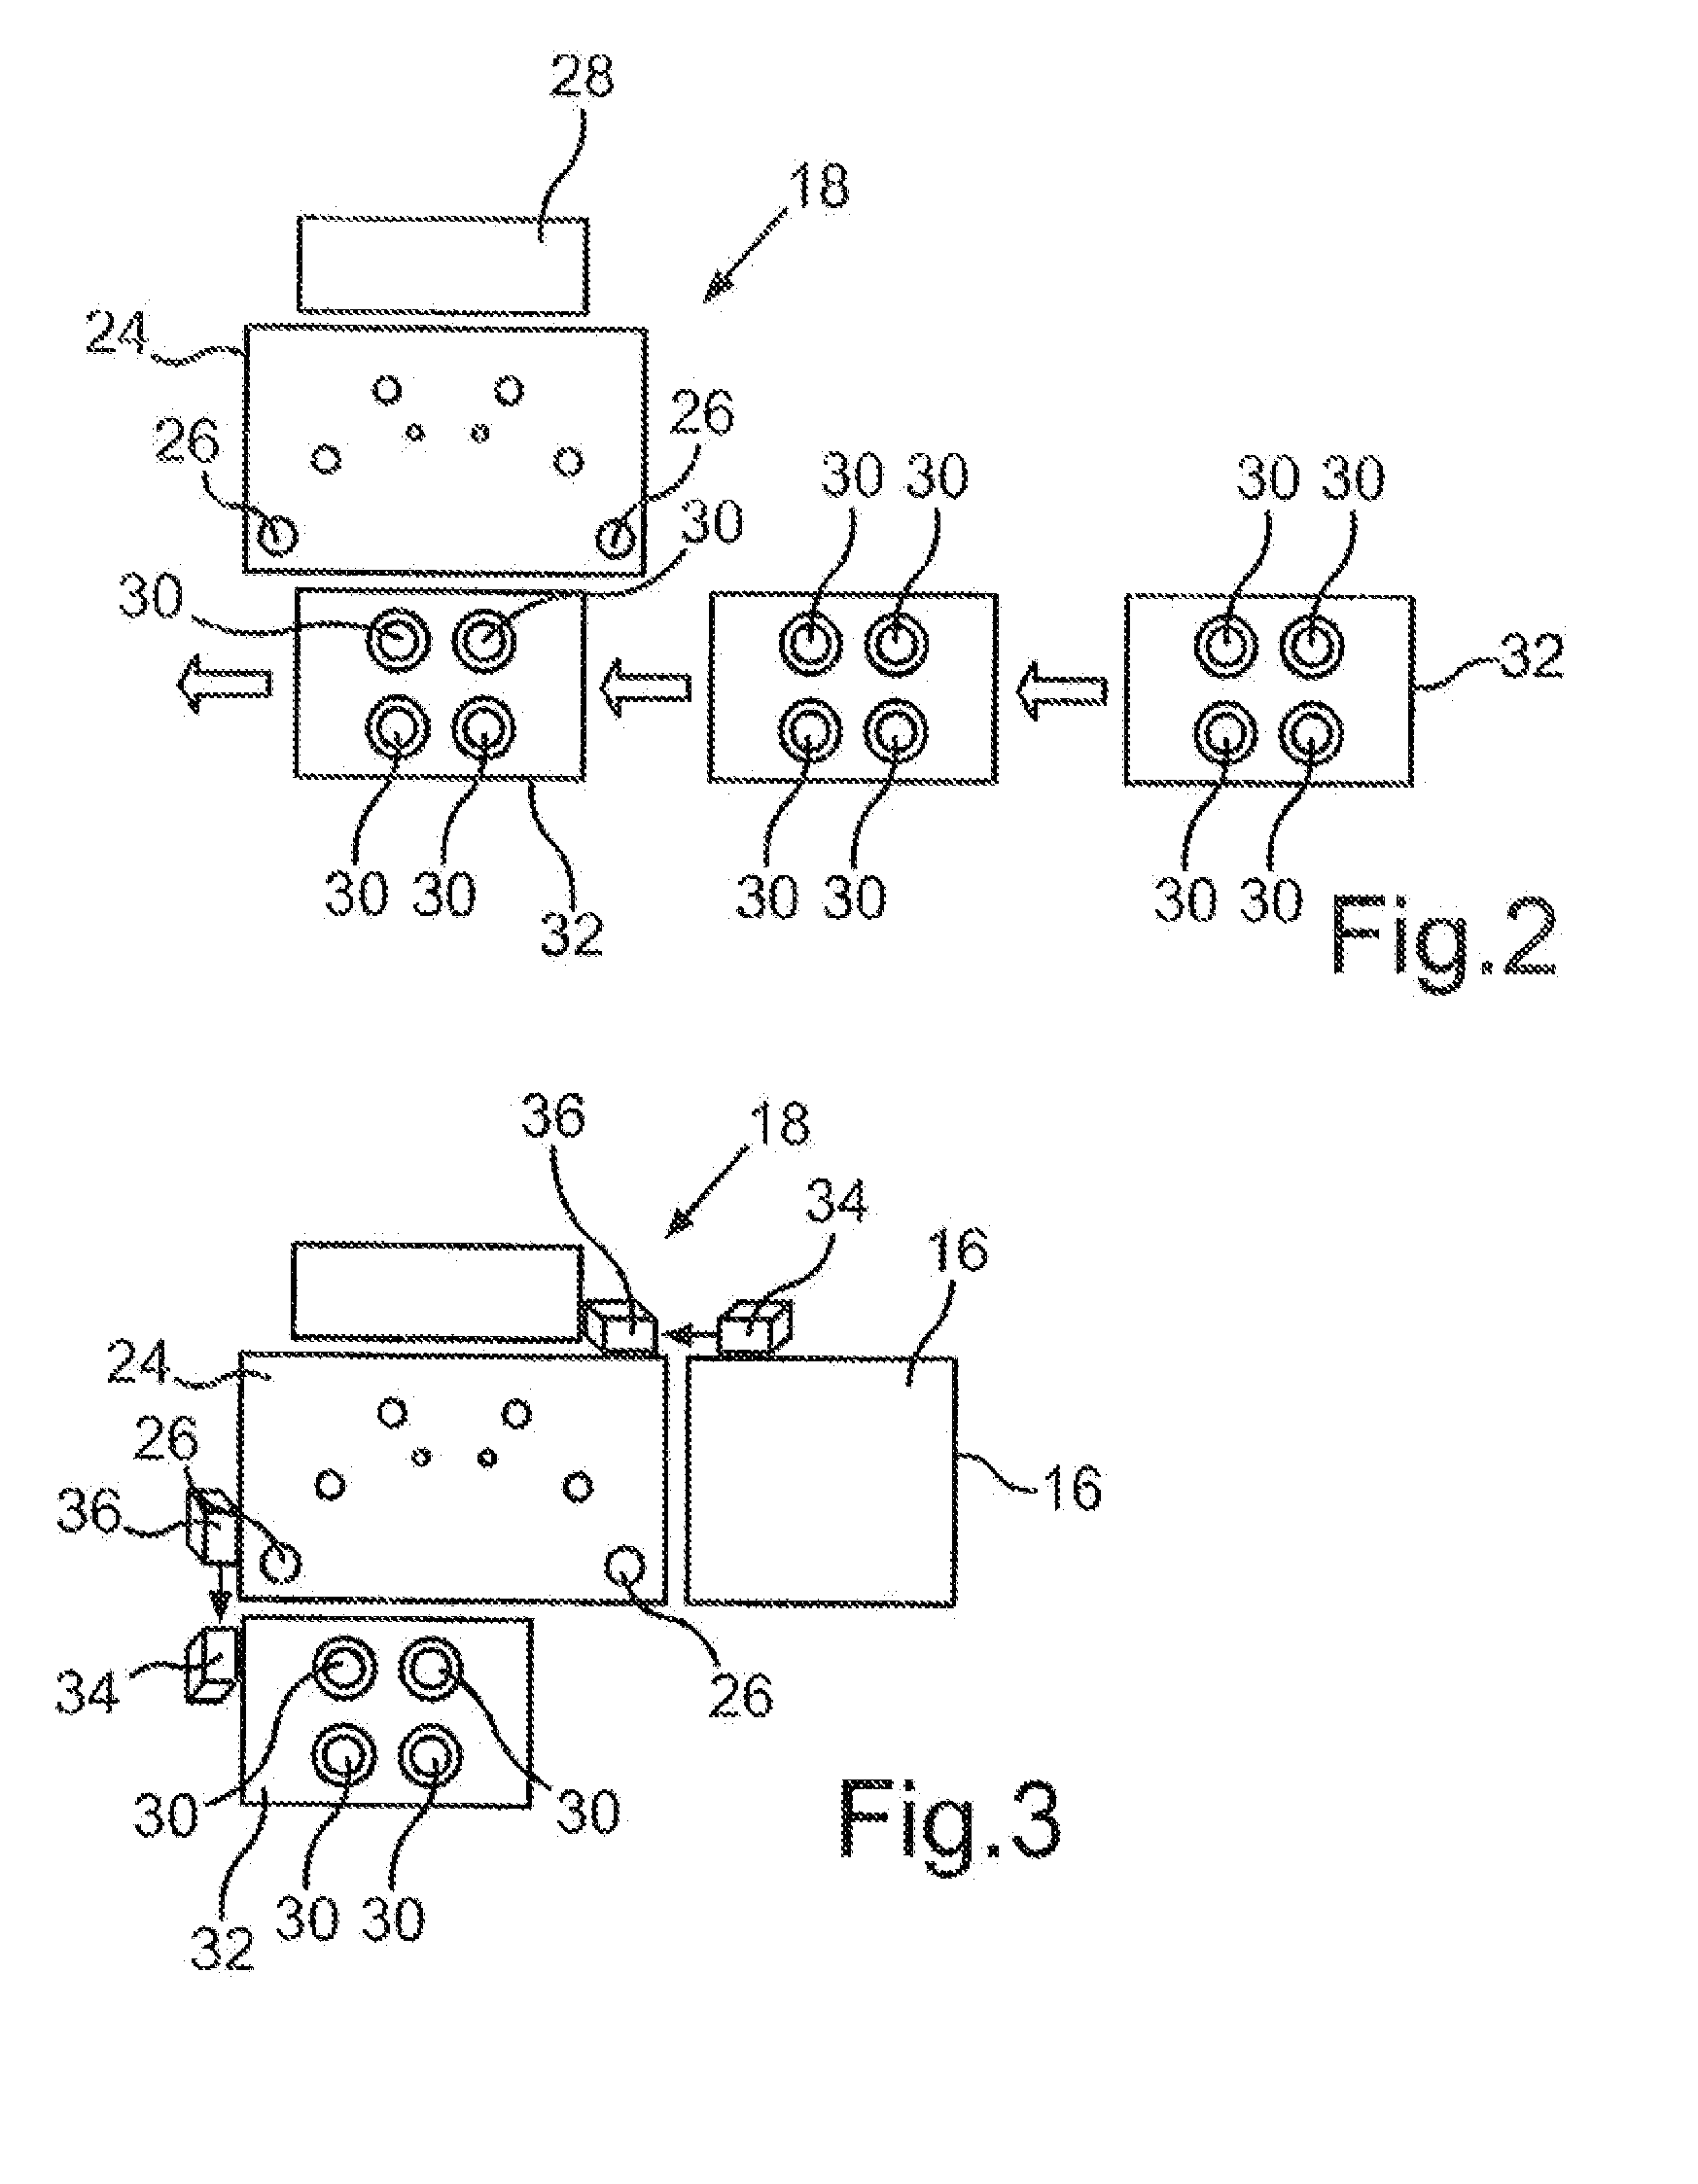 Method for Operating a Production Plant